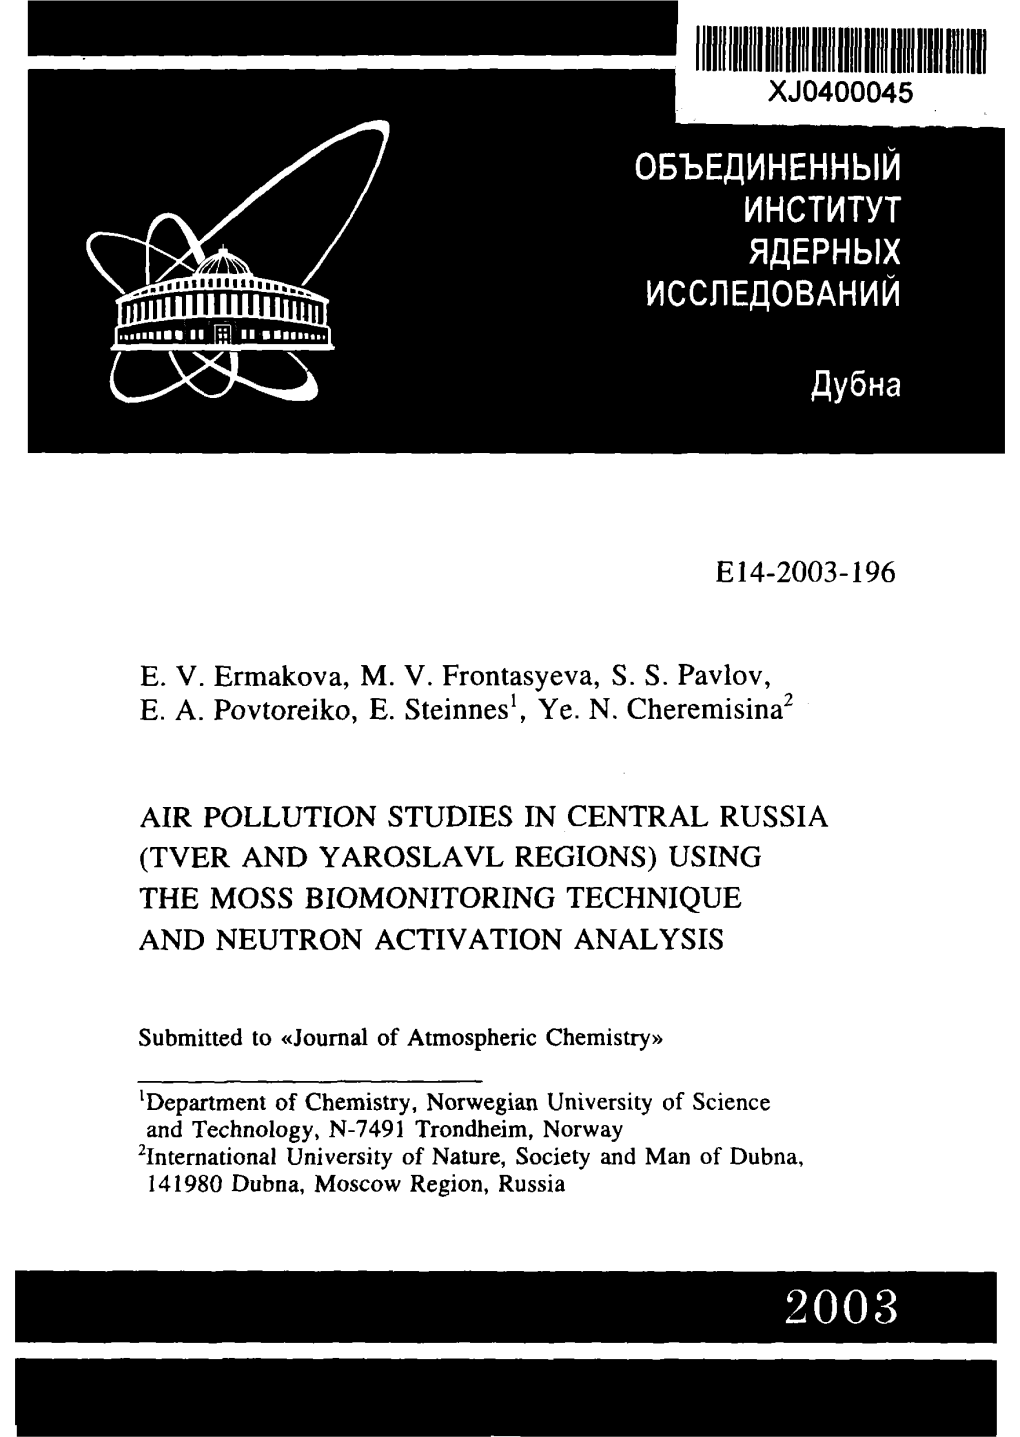 Air Pollution Studies in Central Russia (Tver and Yaroslavl Regions) Using the Moss Biomonitoring Technique and Neutron Activation Analysis